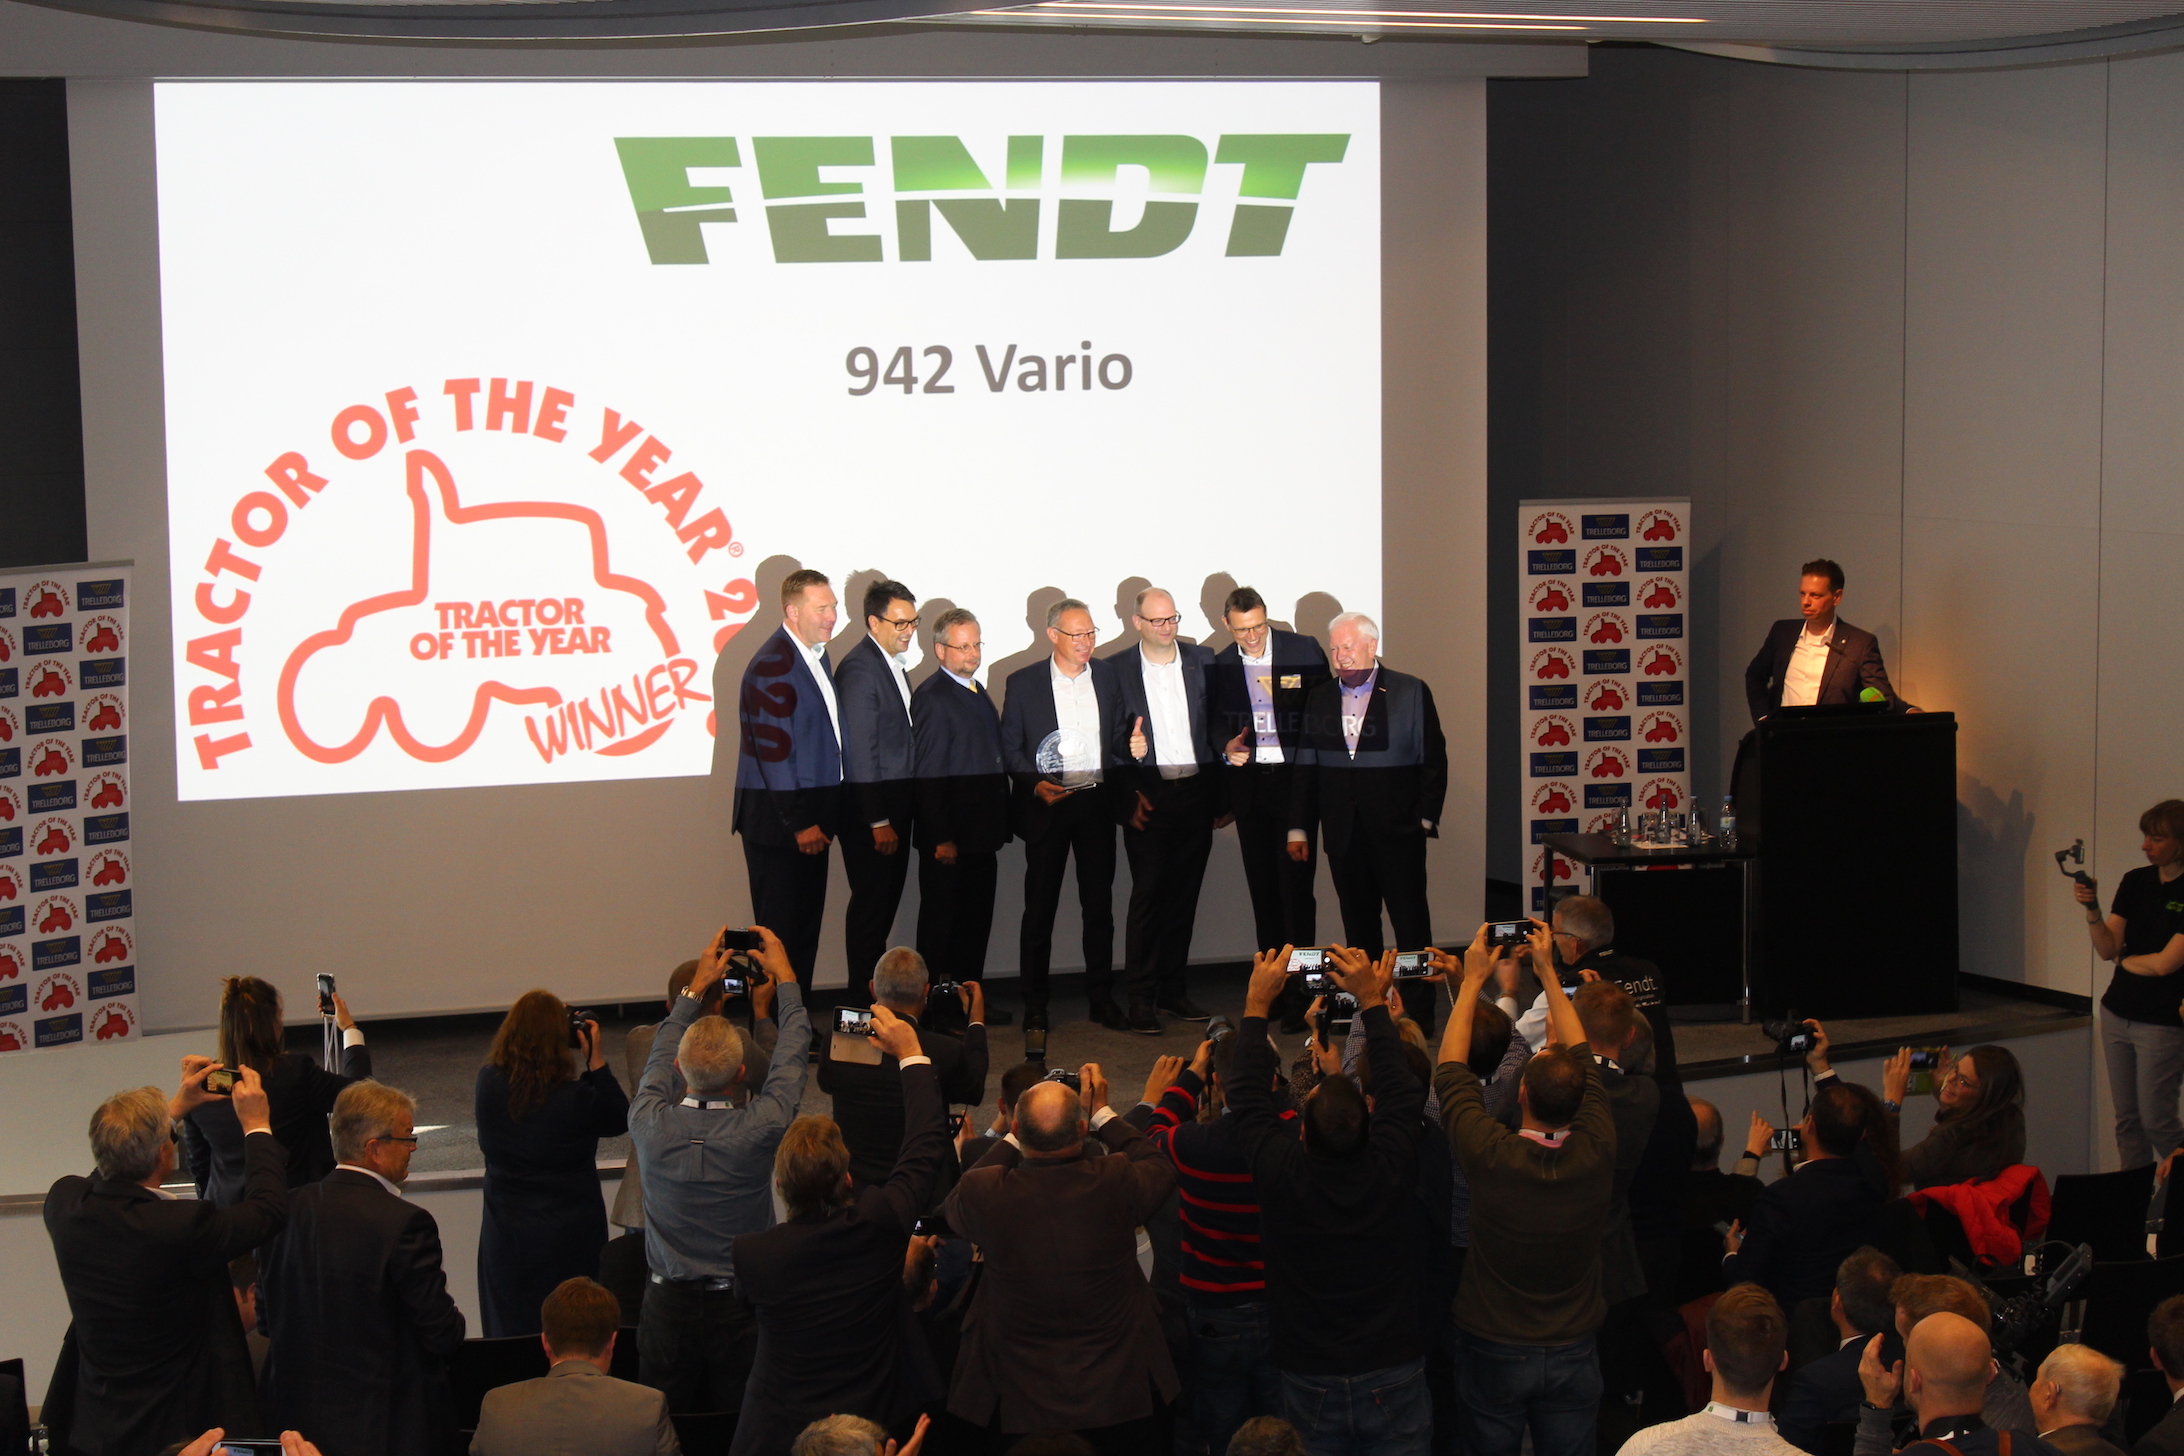 Tractor of the Year 2020: Fendt 942 Vario